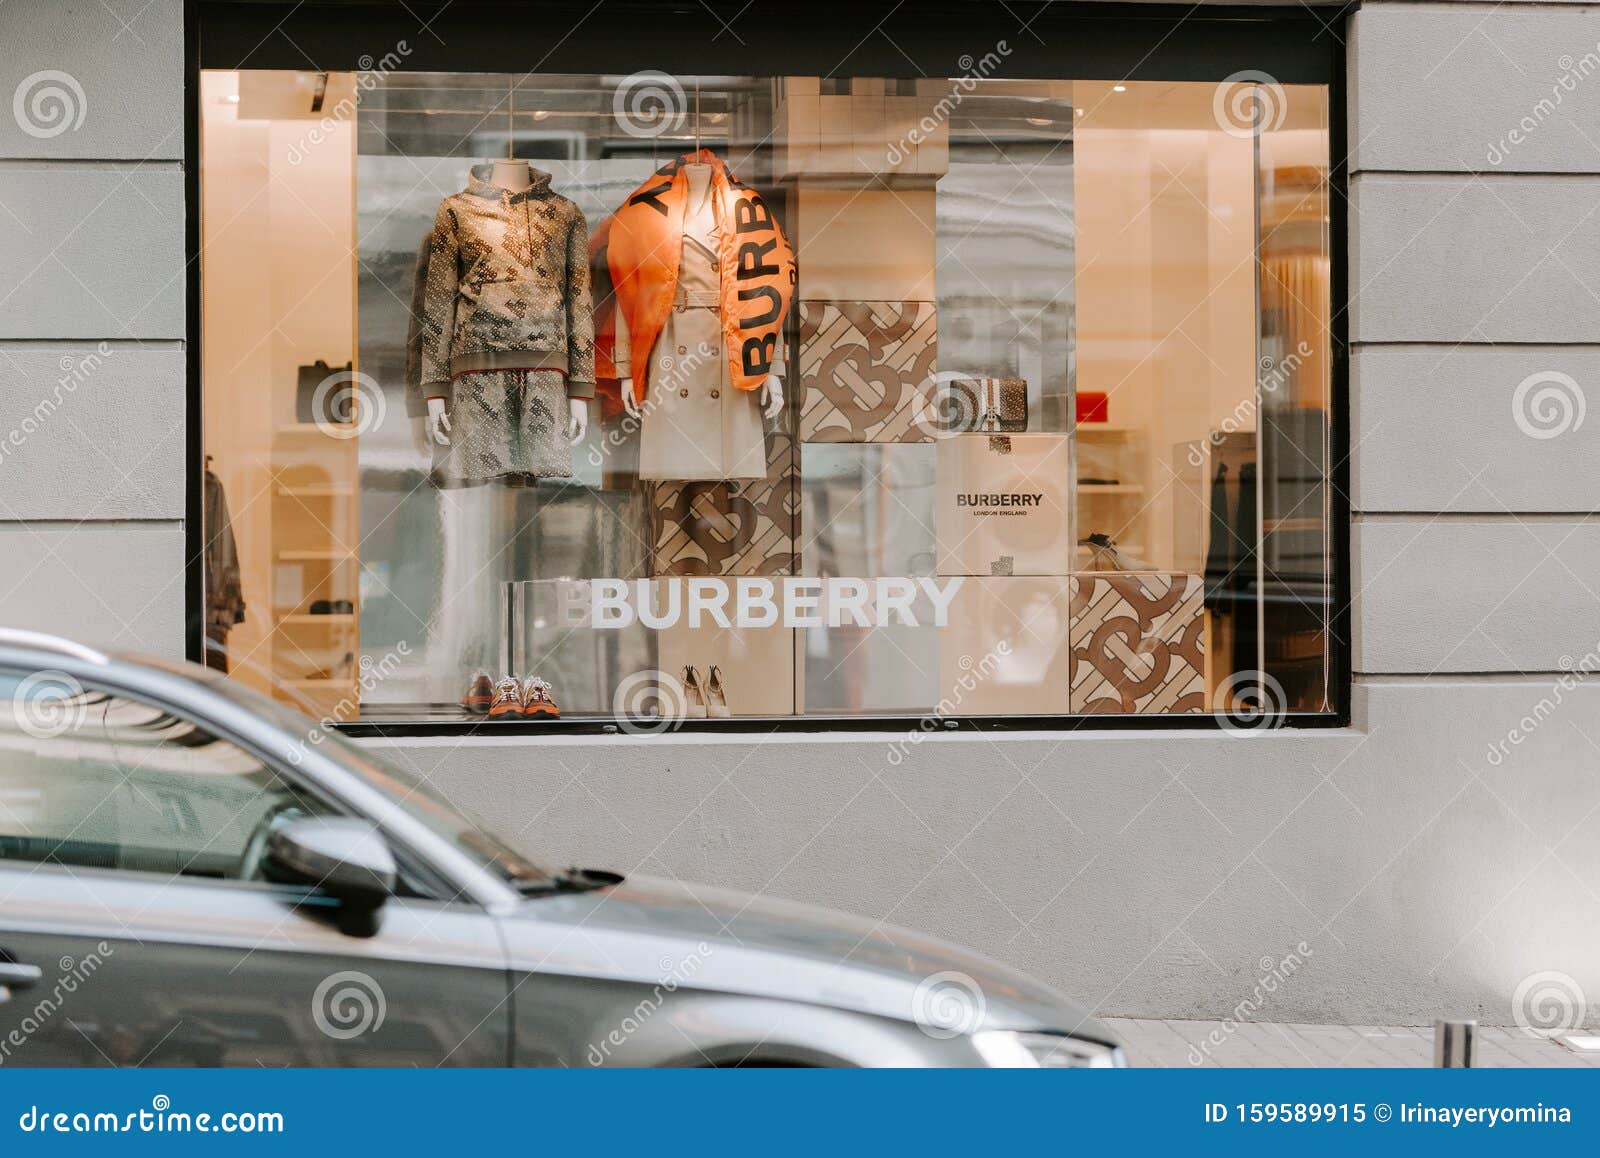 Burberry London Store Boutique Display Window. Signboard Logo Brend Sign And Showcase Window Of ...